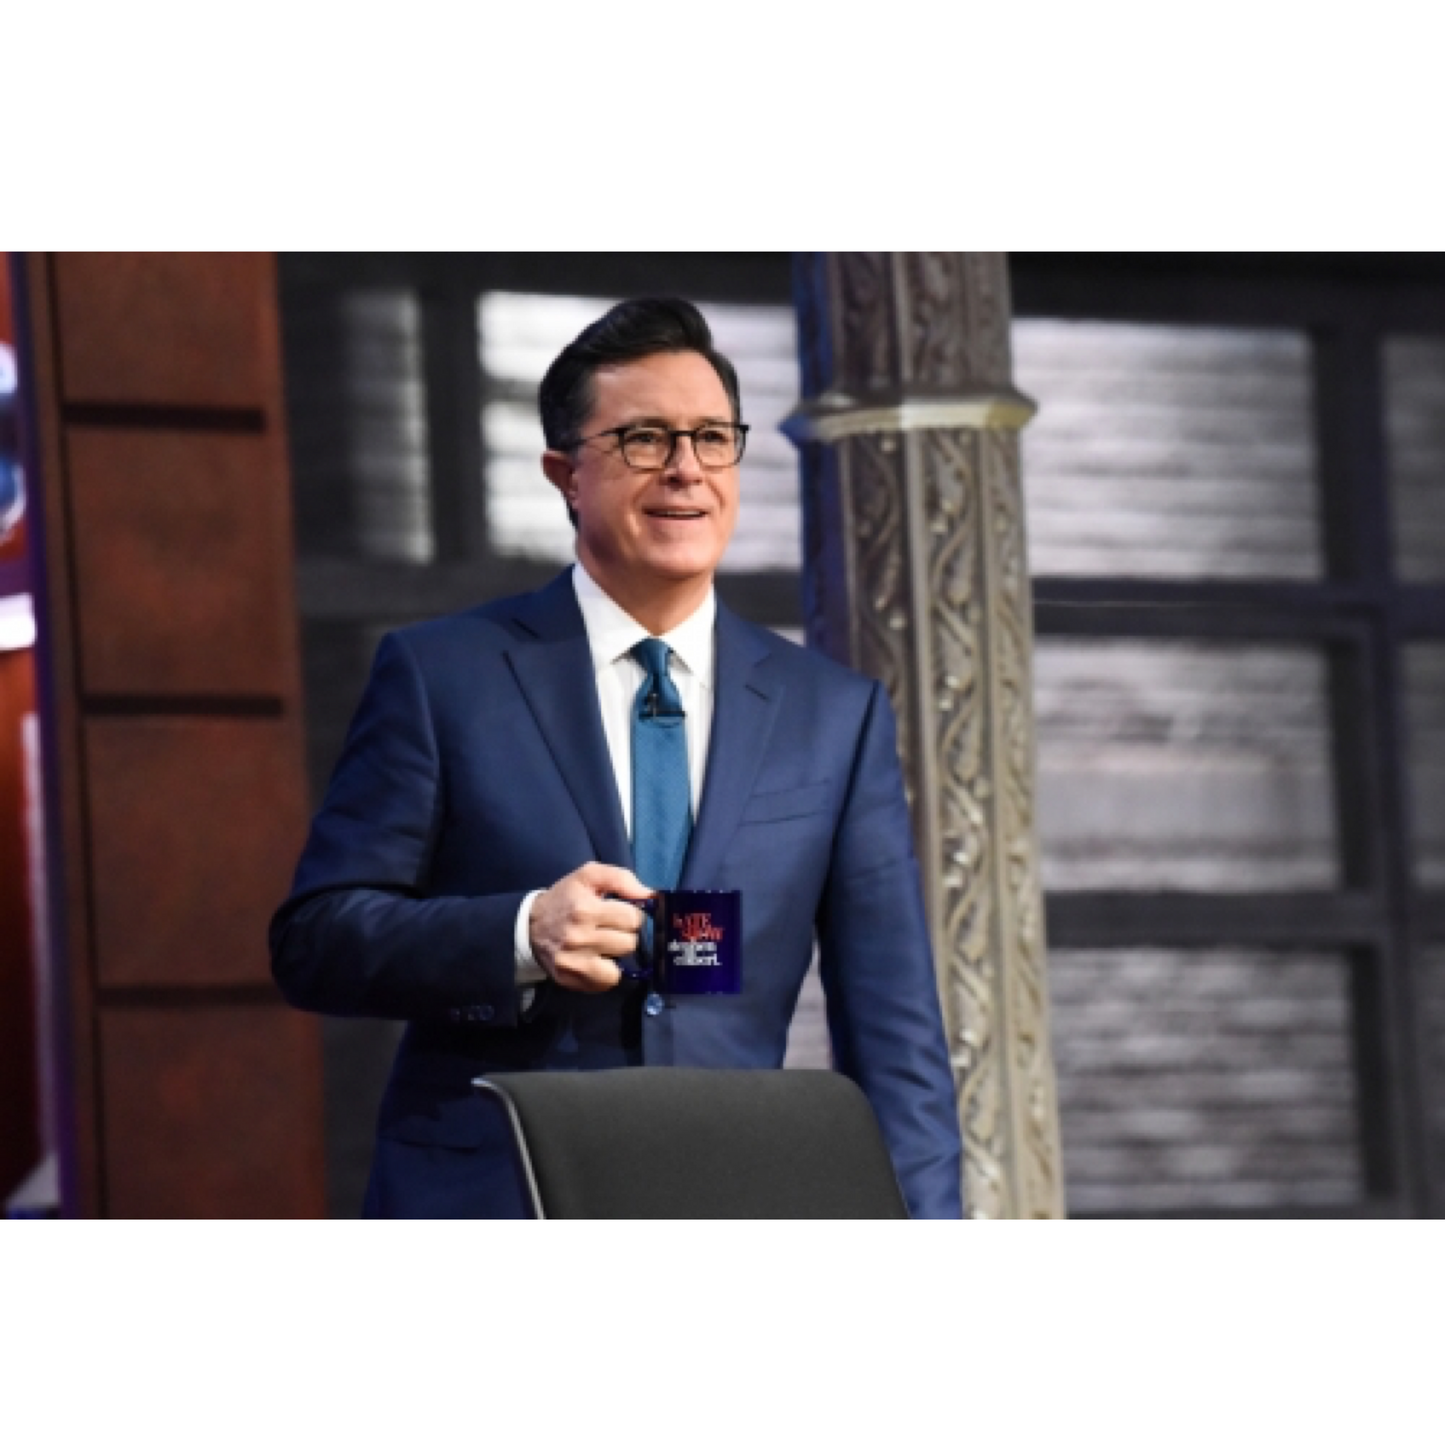 The Late Show with Stephen Colbert Official Mug